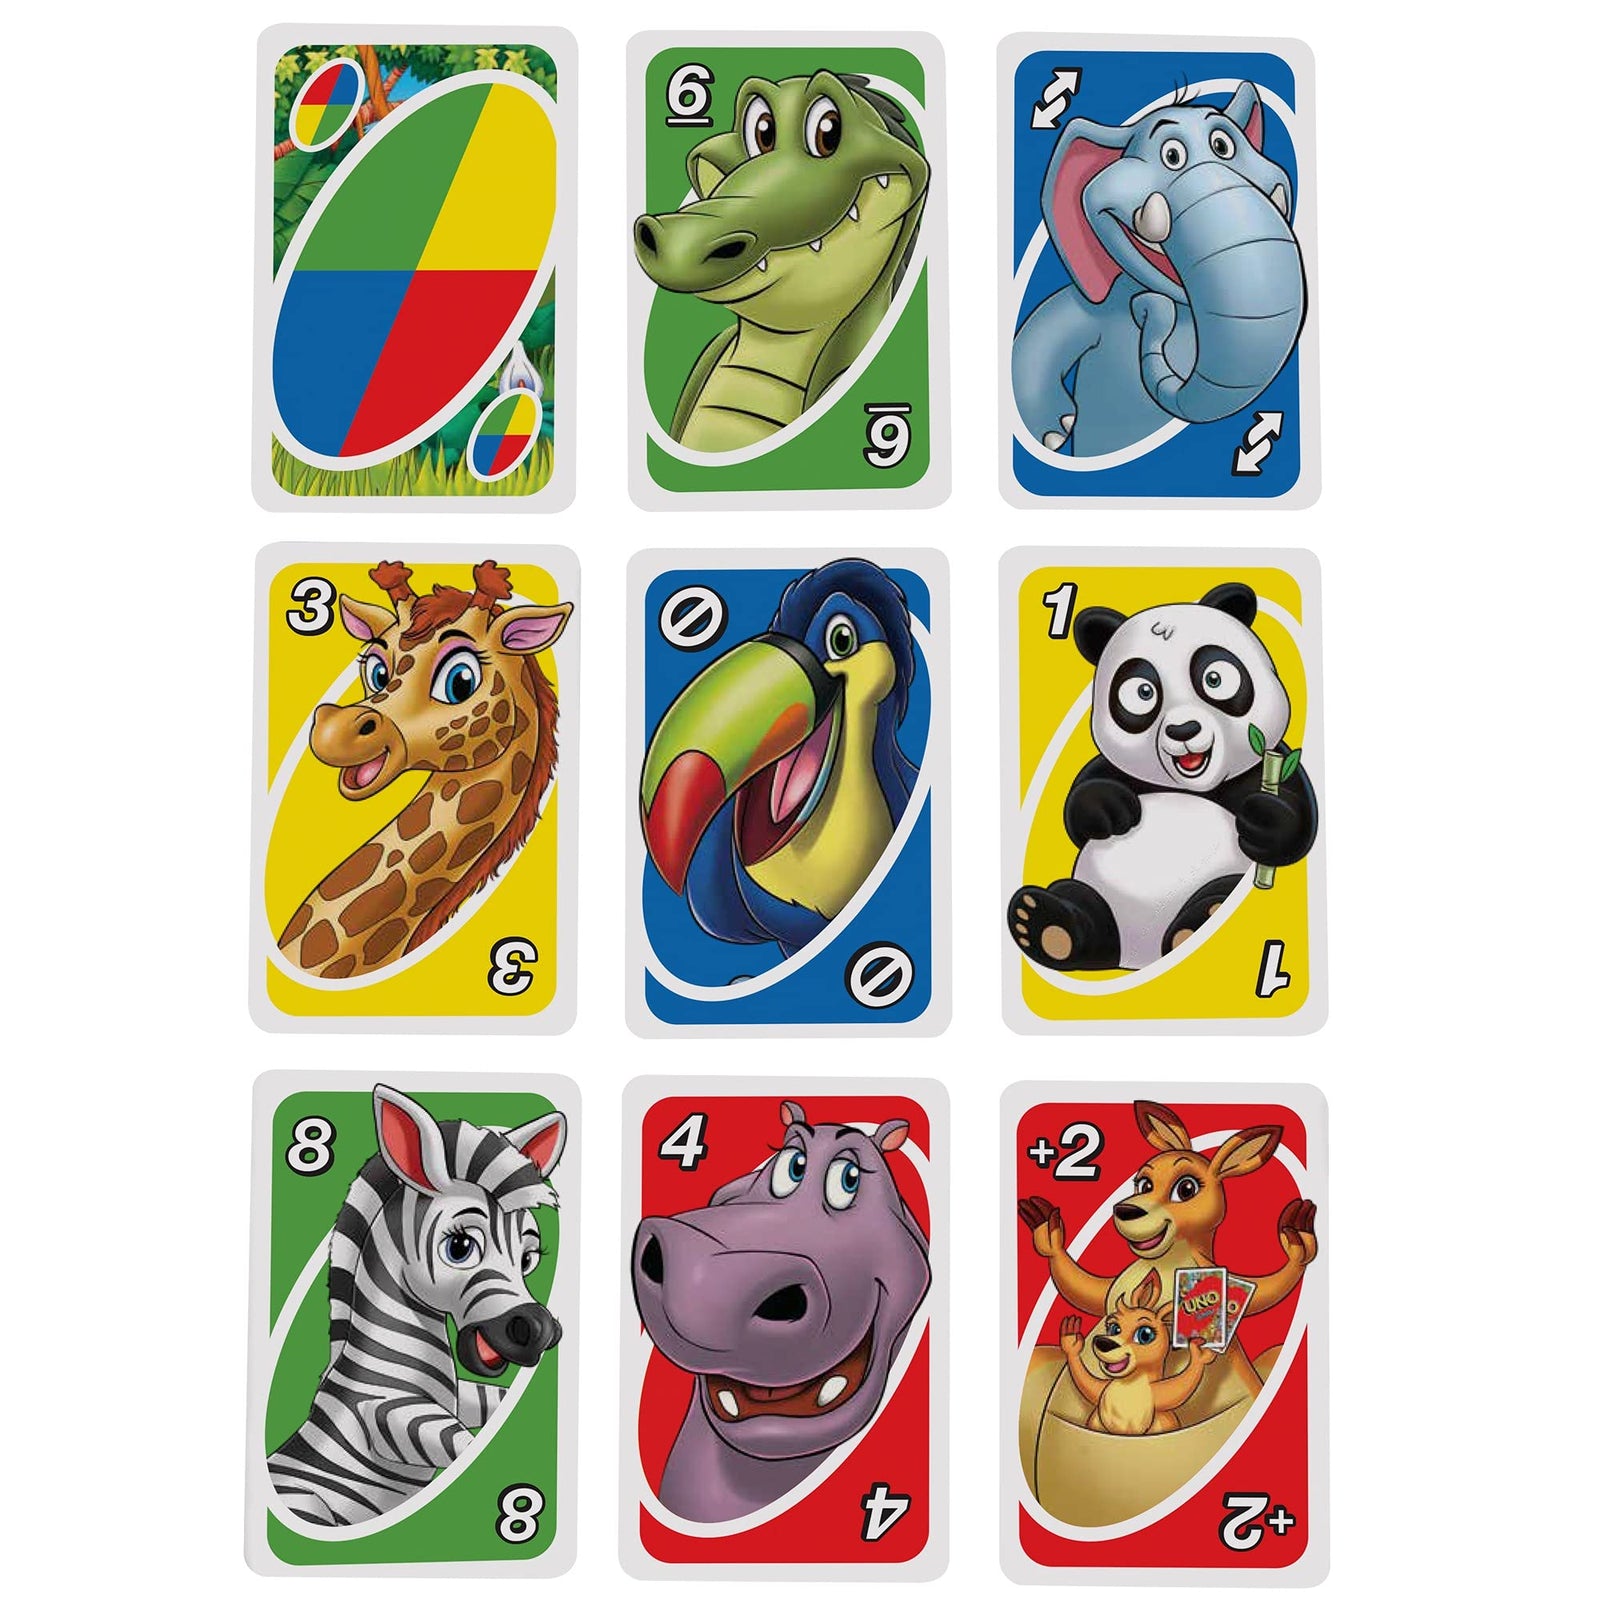 Mattel UNO Junior Card Game with 45 Cards, Gift for Kids 3 Years Old & Up